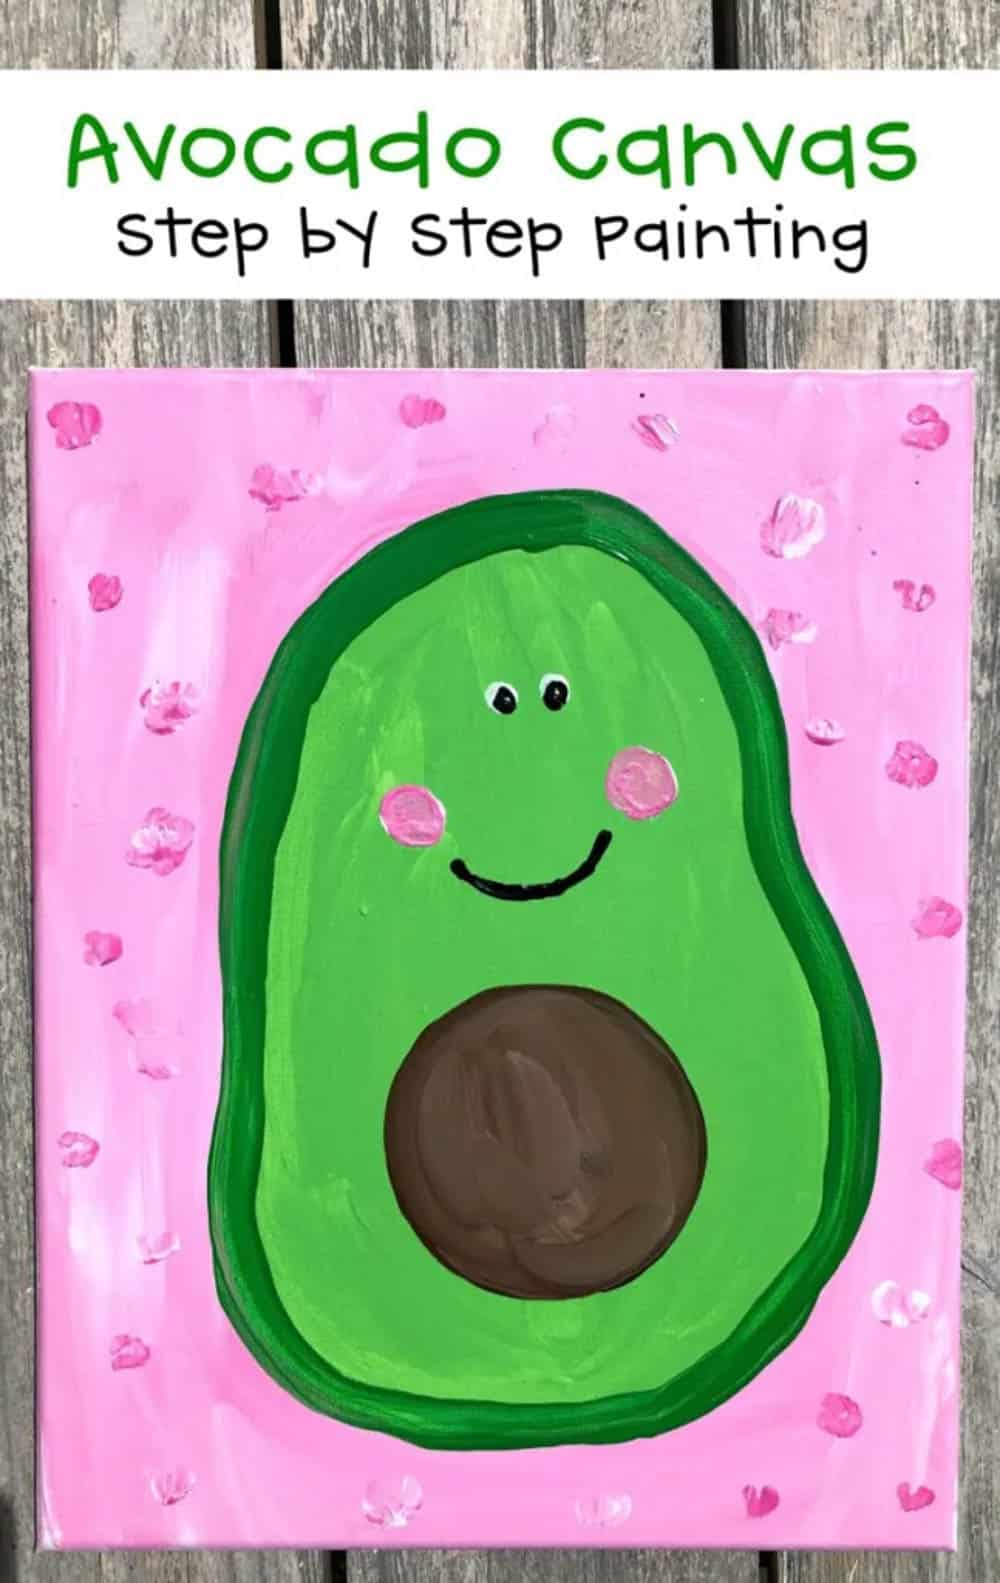 Avocado Canvas Step By Step Painting